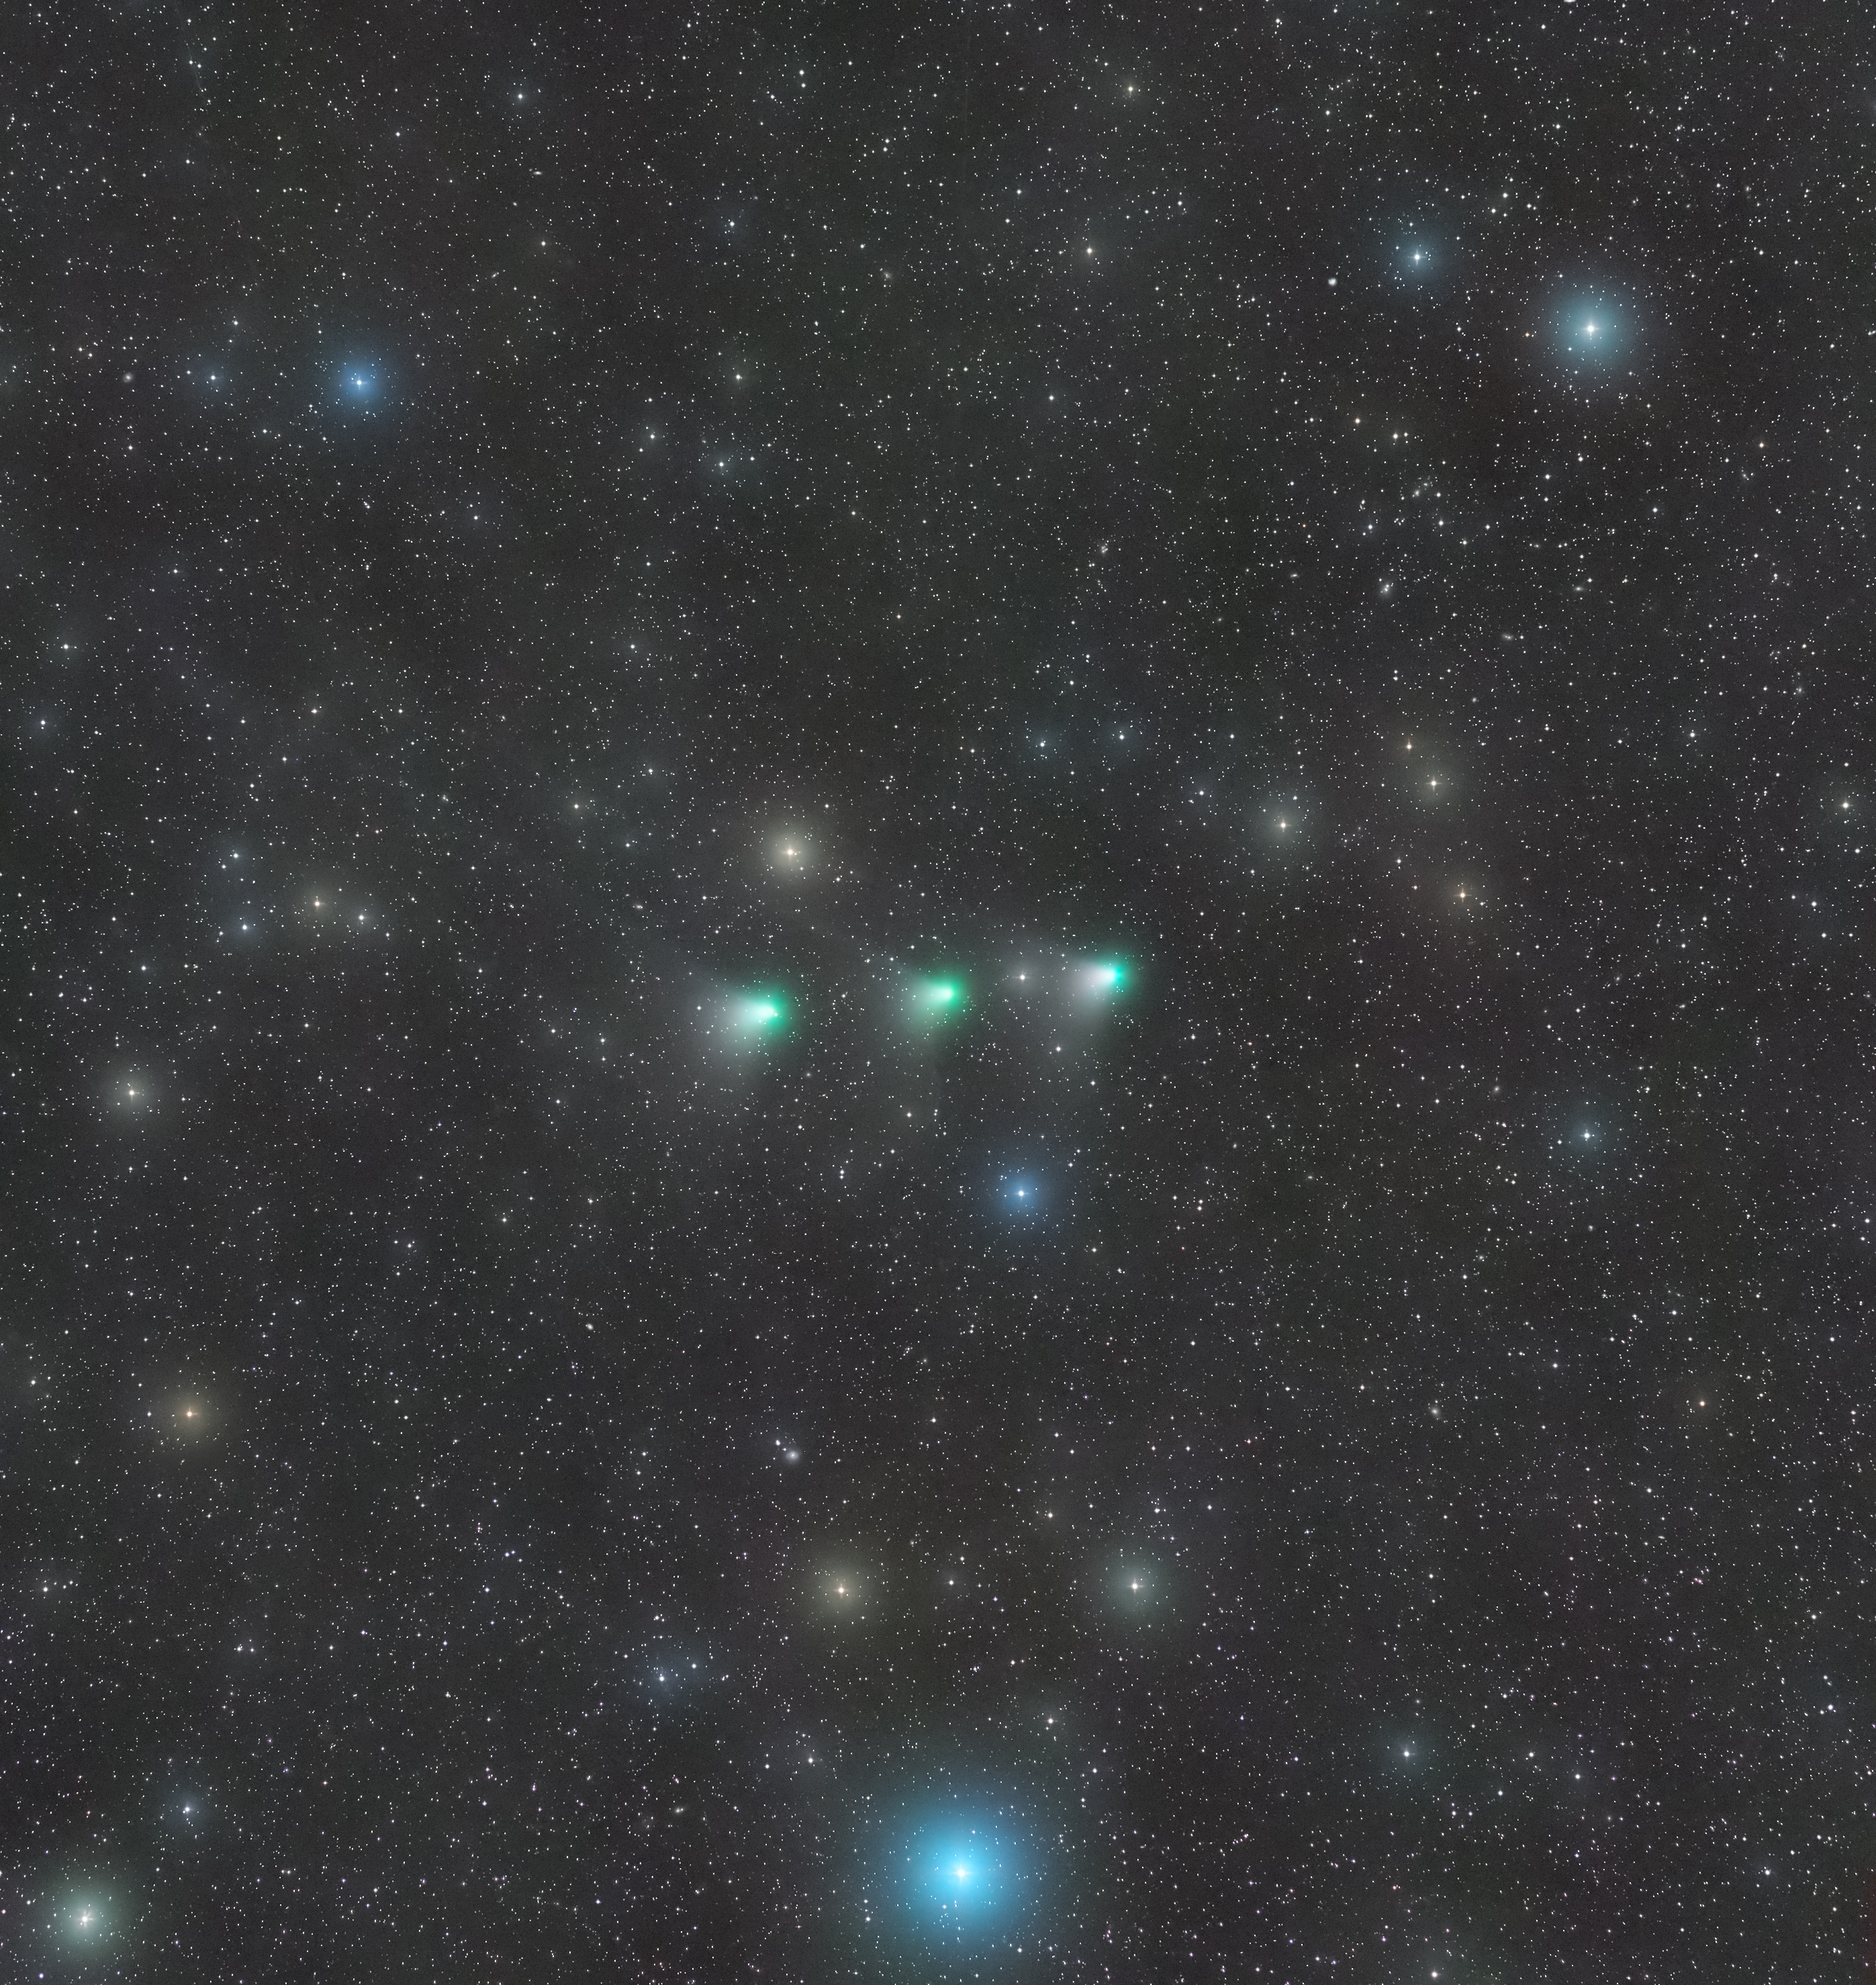 The image captures the movement of Comet C/2022 E3 ZTF over 3 days (Dec. 27, 28, and 29 2022) in the night sky.